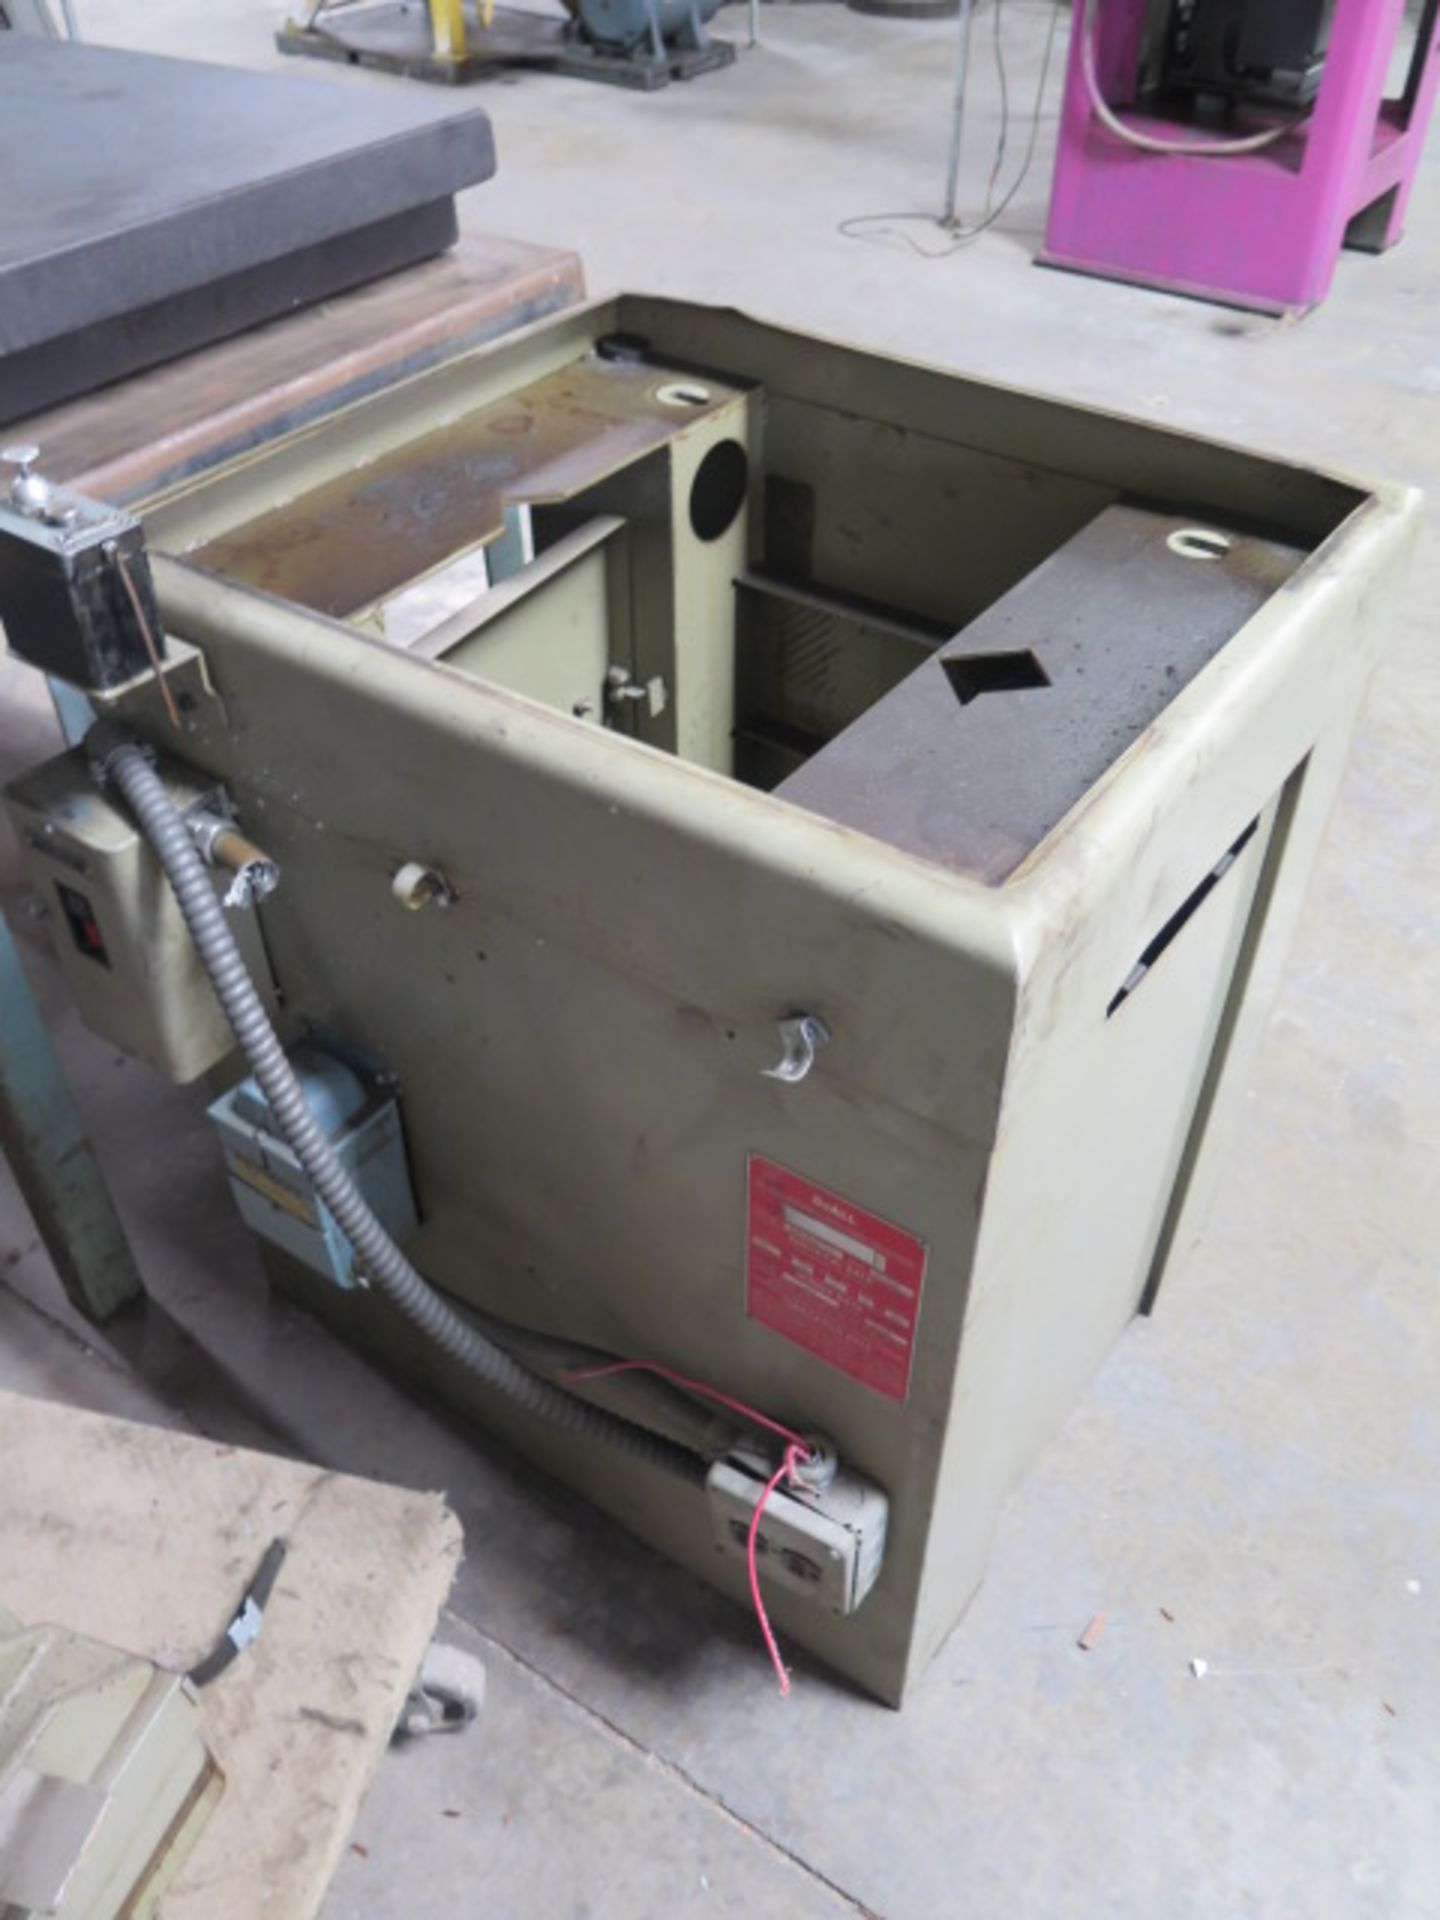 DoAll DH-612 6” x 12” Surface Grinder s/n 138-682780 (FOR PARTS) - Image 3 of 3